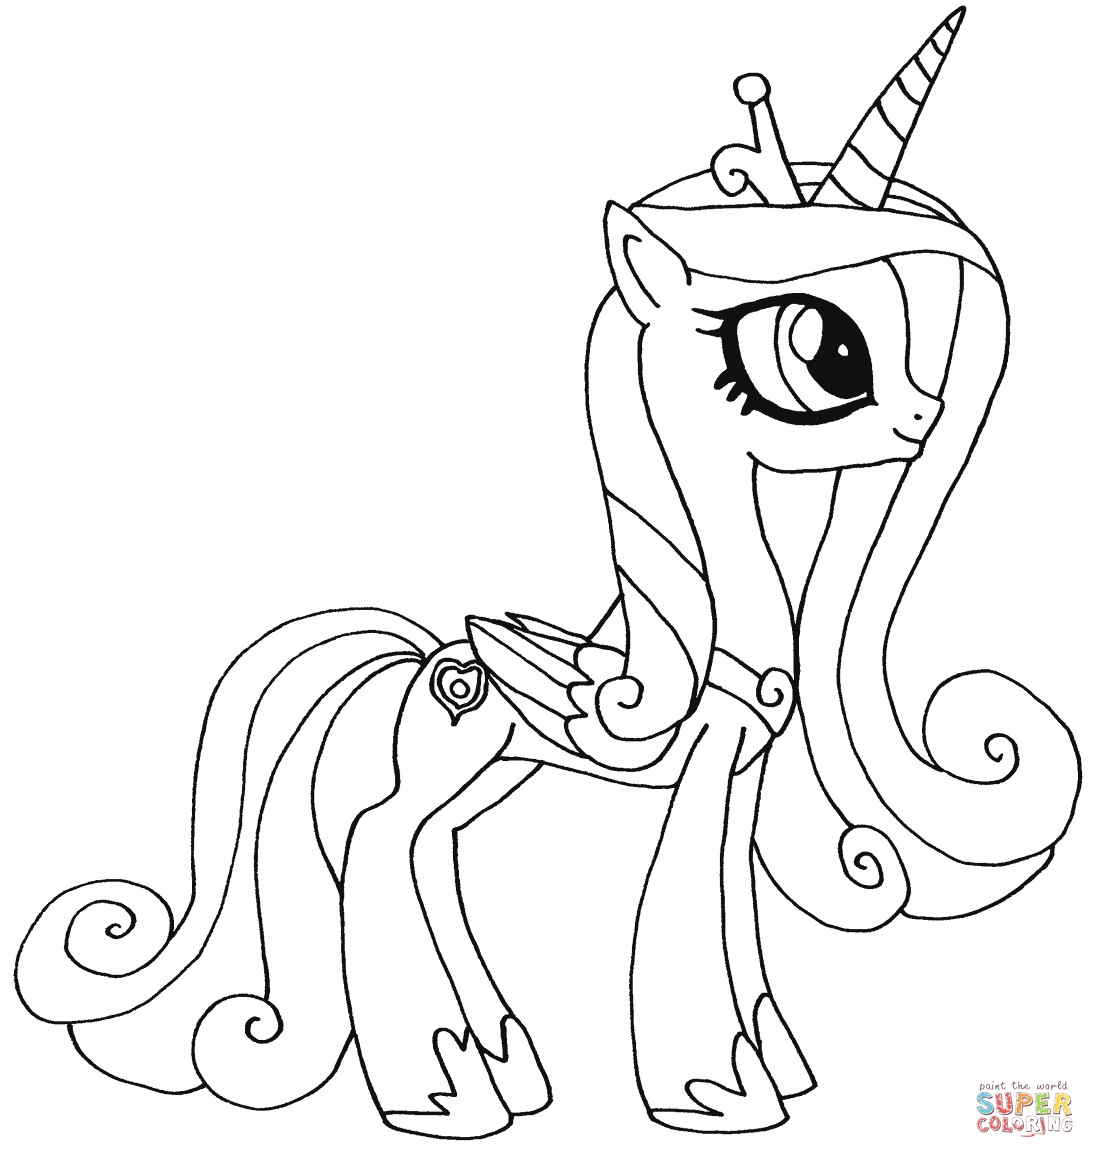 My Little Pony Princess Coloring Pages   BubaKids.com